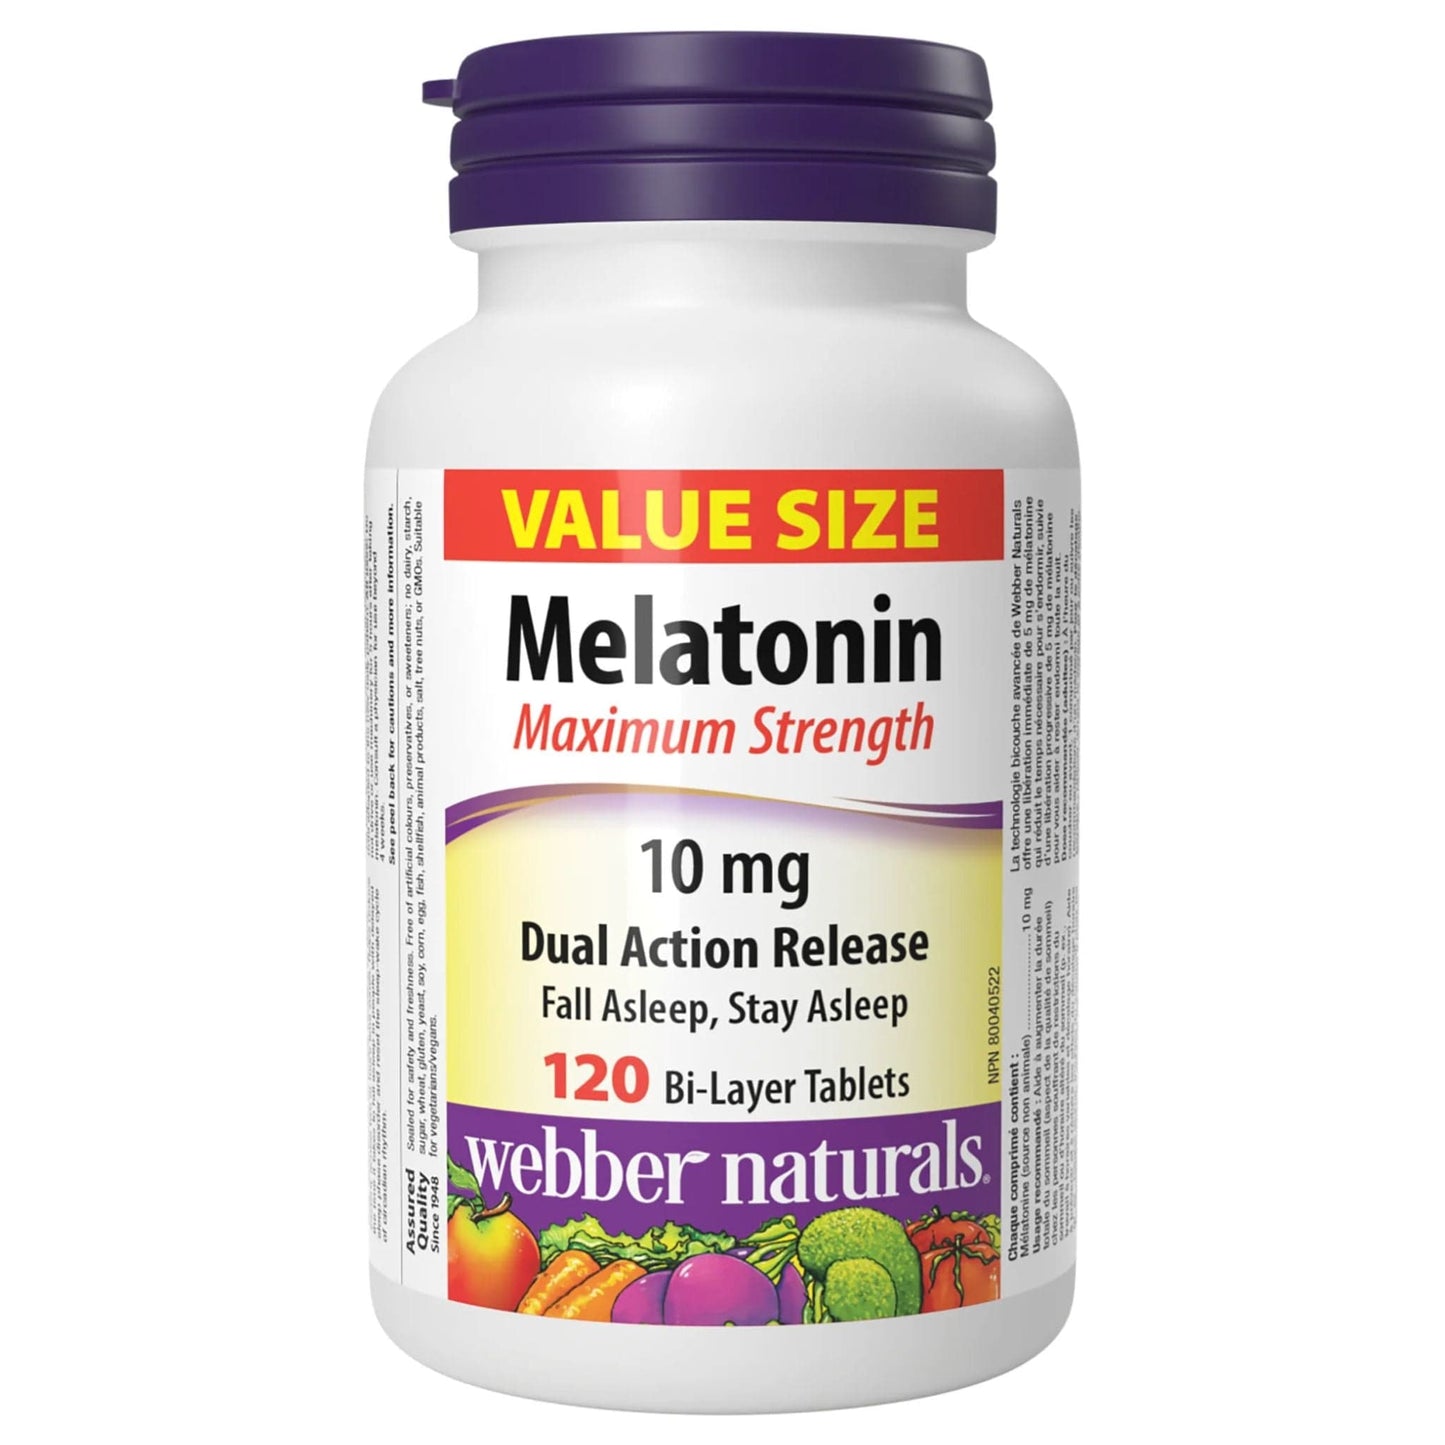 120 Time Release Tablets | Webber Naturals Melatonin Maximum Strength 10mg Dual Action Release